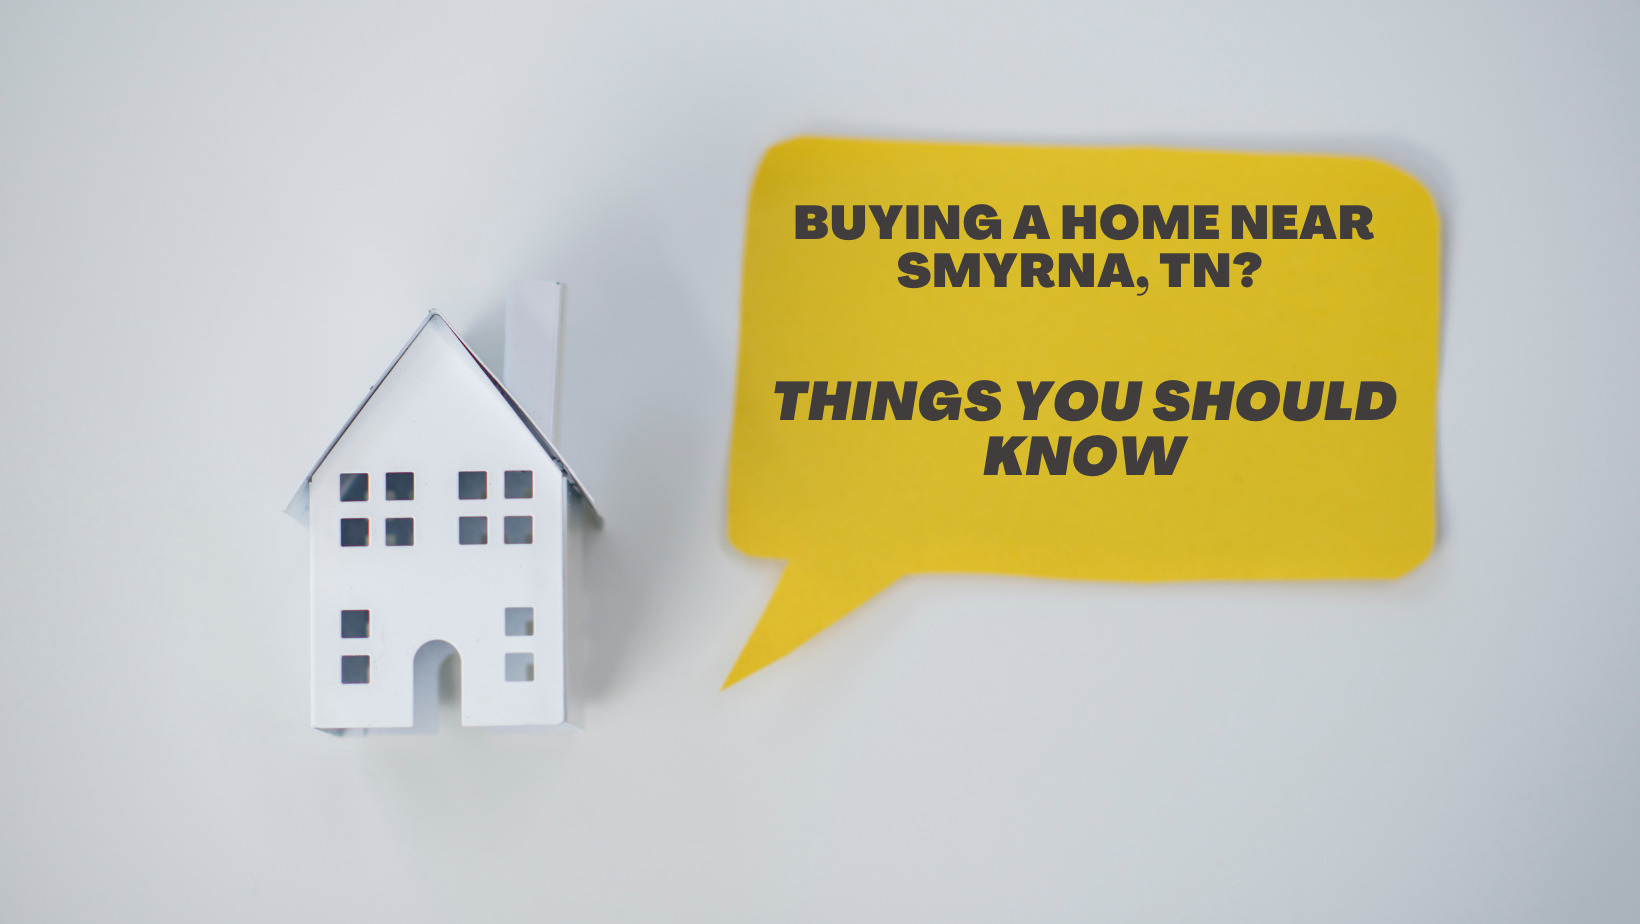 Guide To Buying a Home Near Smyrna